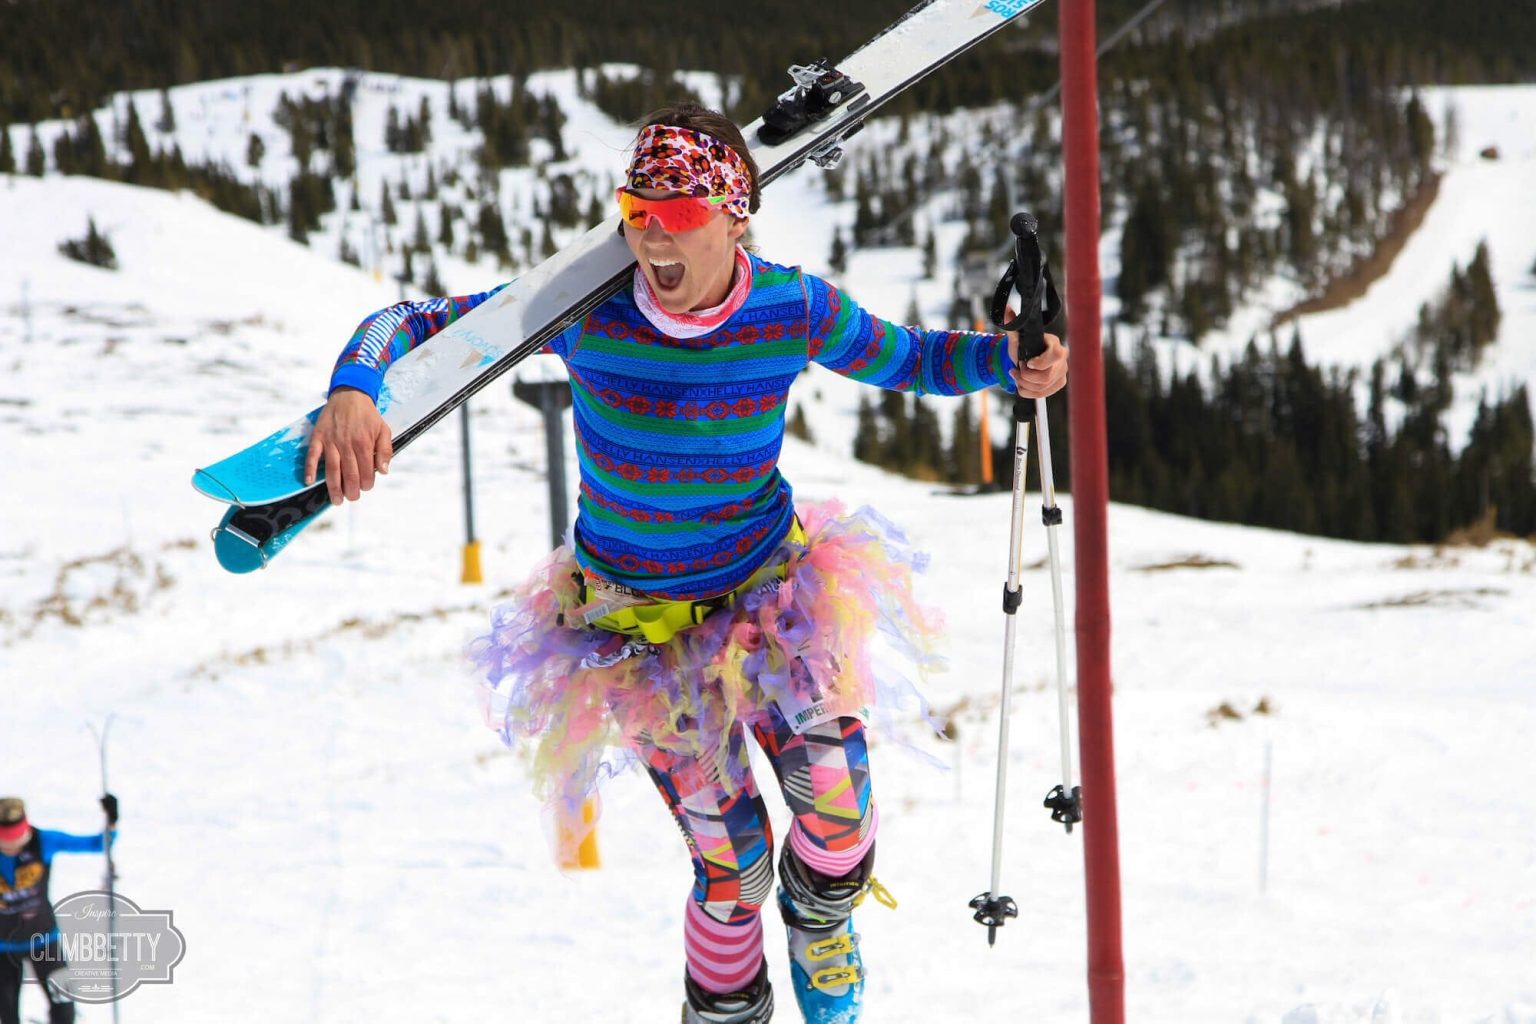 Skier wearing a tutu and crazy tights